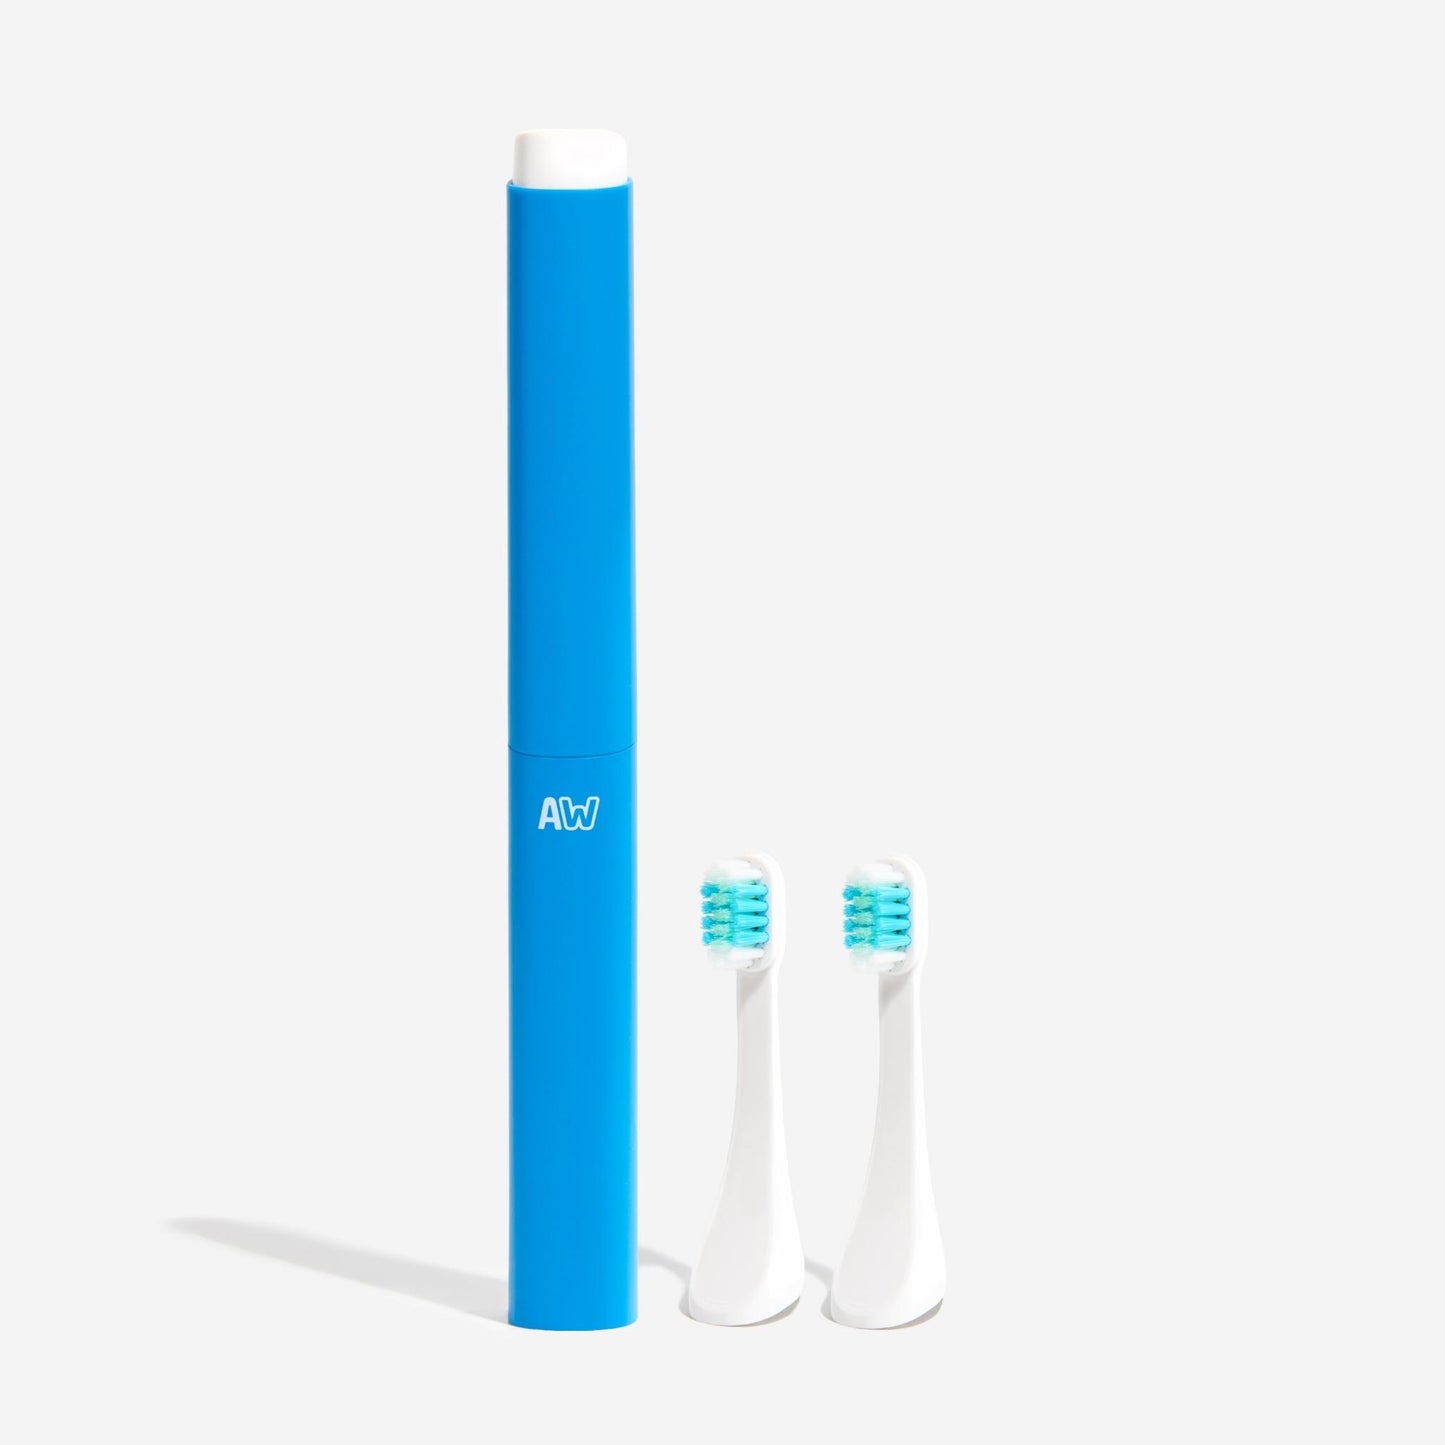 Sonic Toothbrush 2.0 Replacement Heads (2-pack)